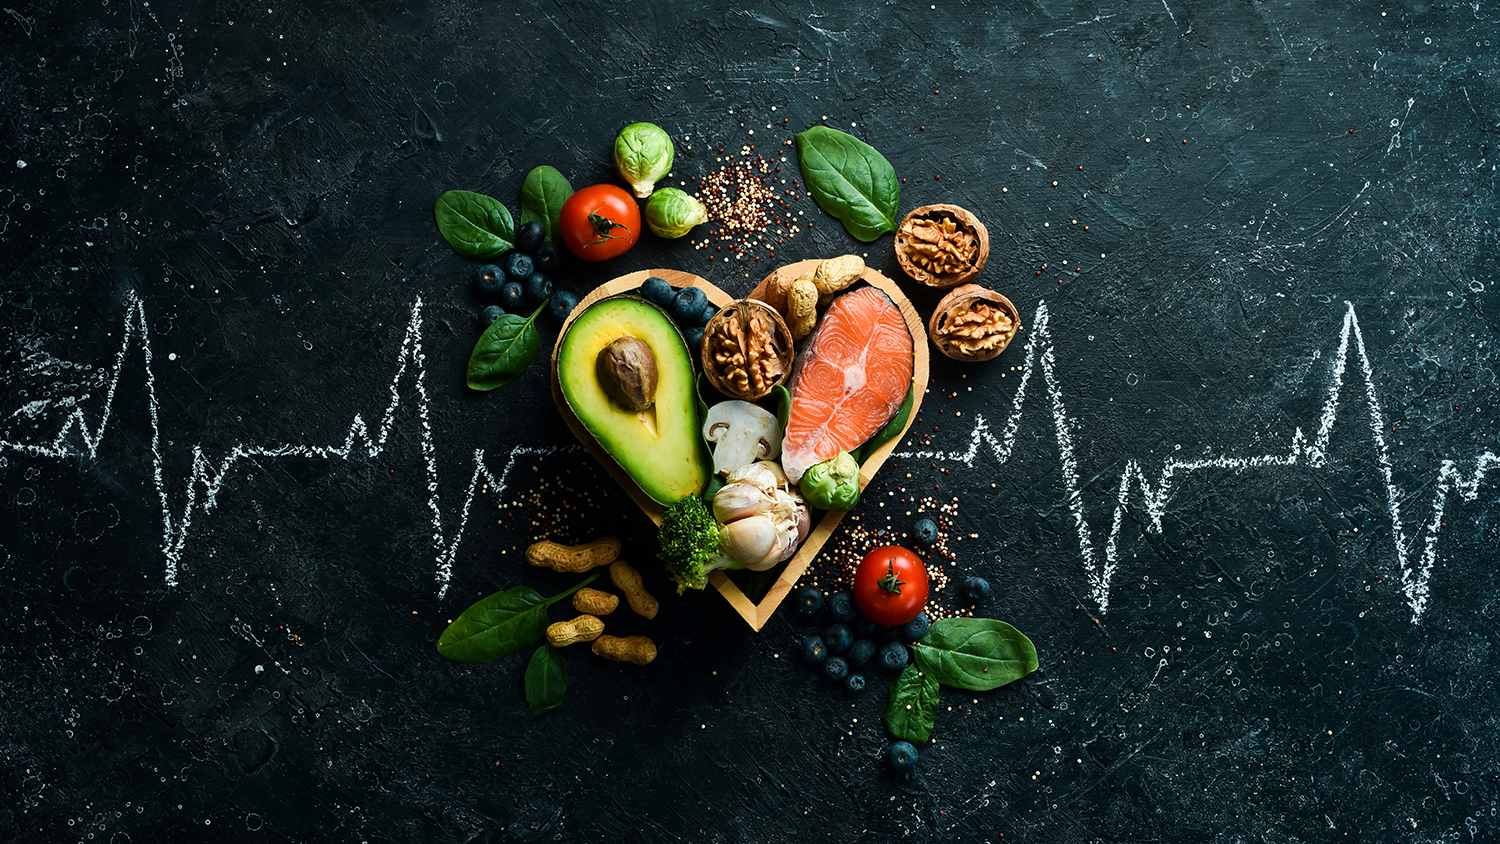 food-banner-healthy-foods-low-carbohydrates-food-heart-health-salmon-avocados-blueberries-broccoli-nuts-mushrooms-black-stone-background-top-view.jpg